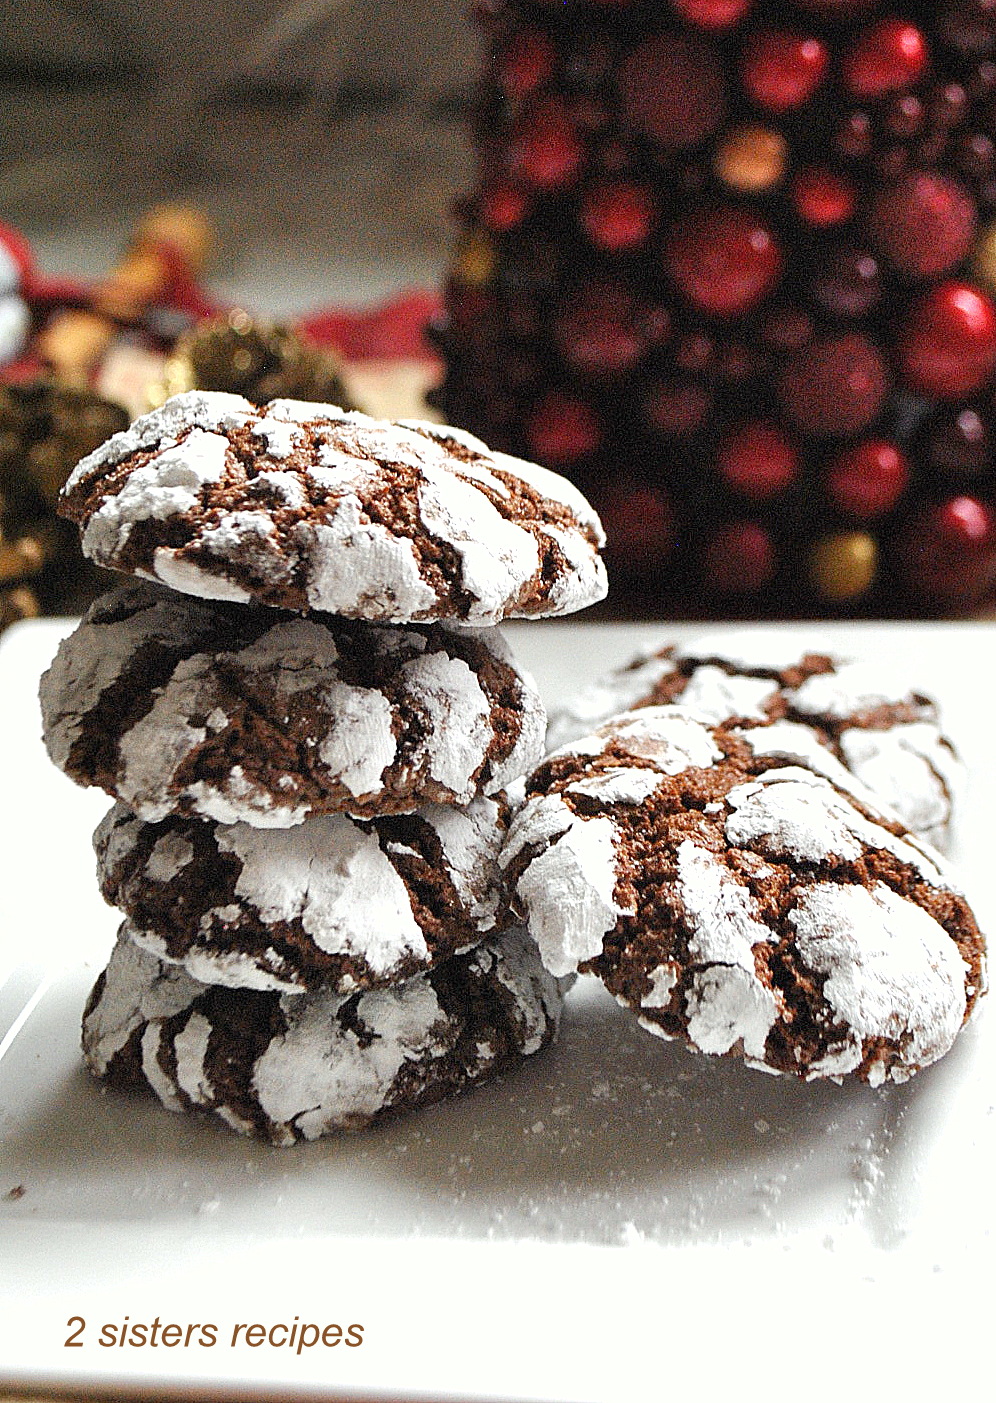 Chocolate Crinkle Cookies by 2sistersrecipes.com